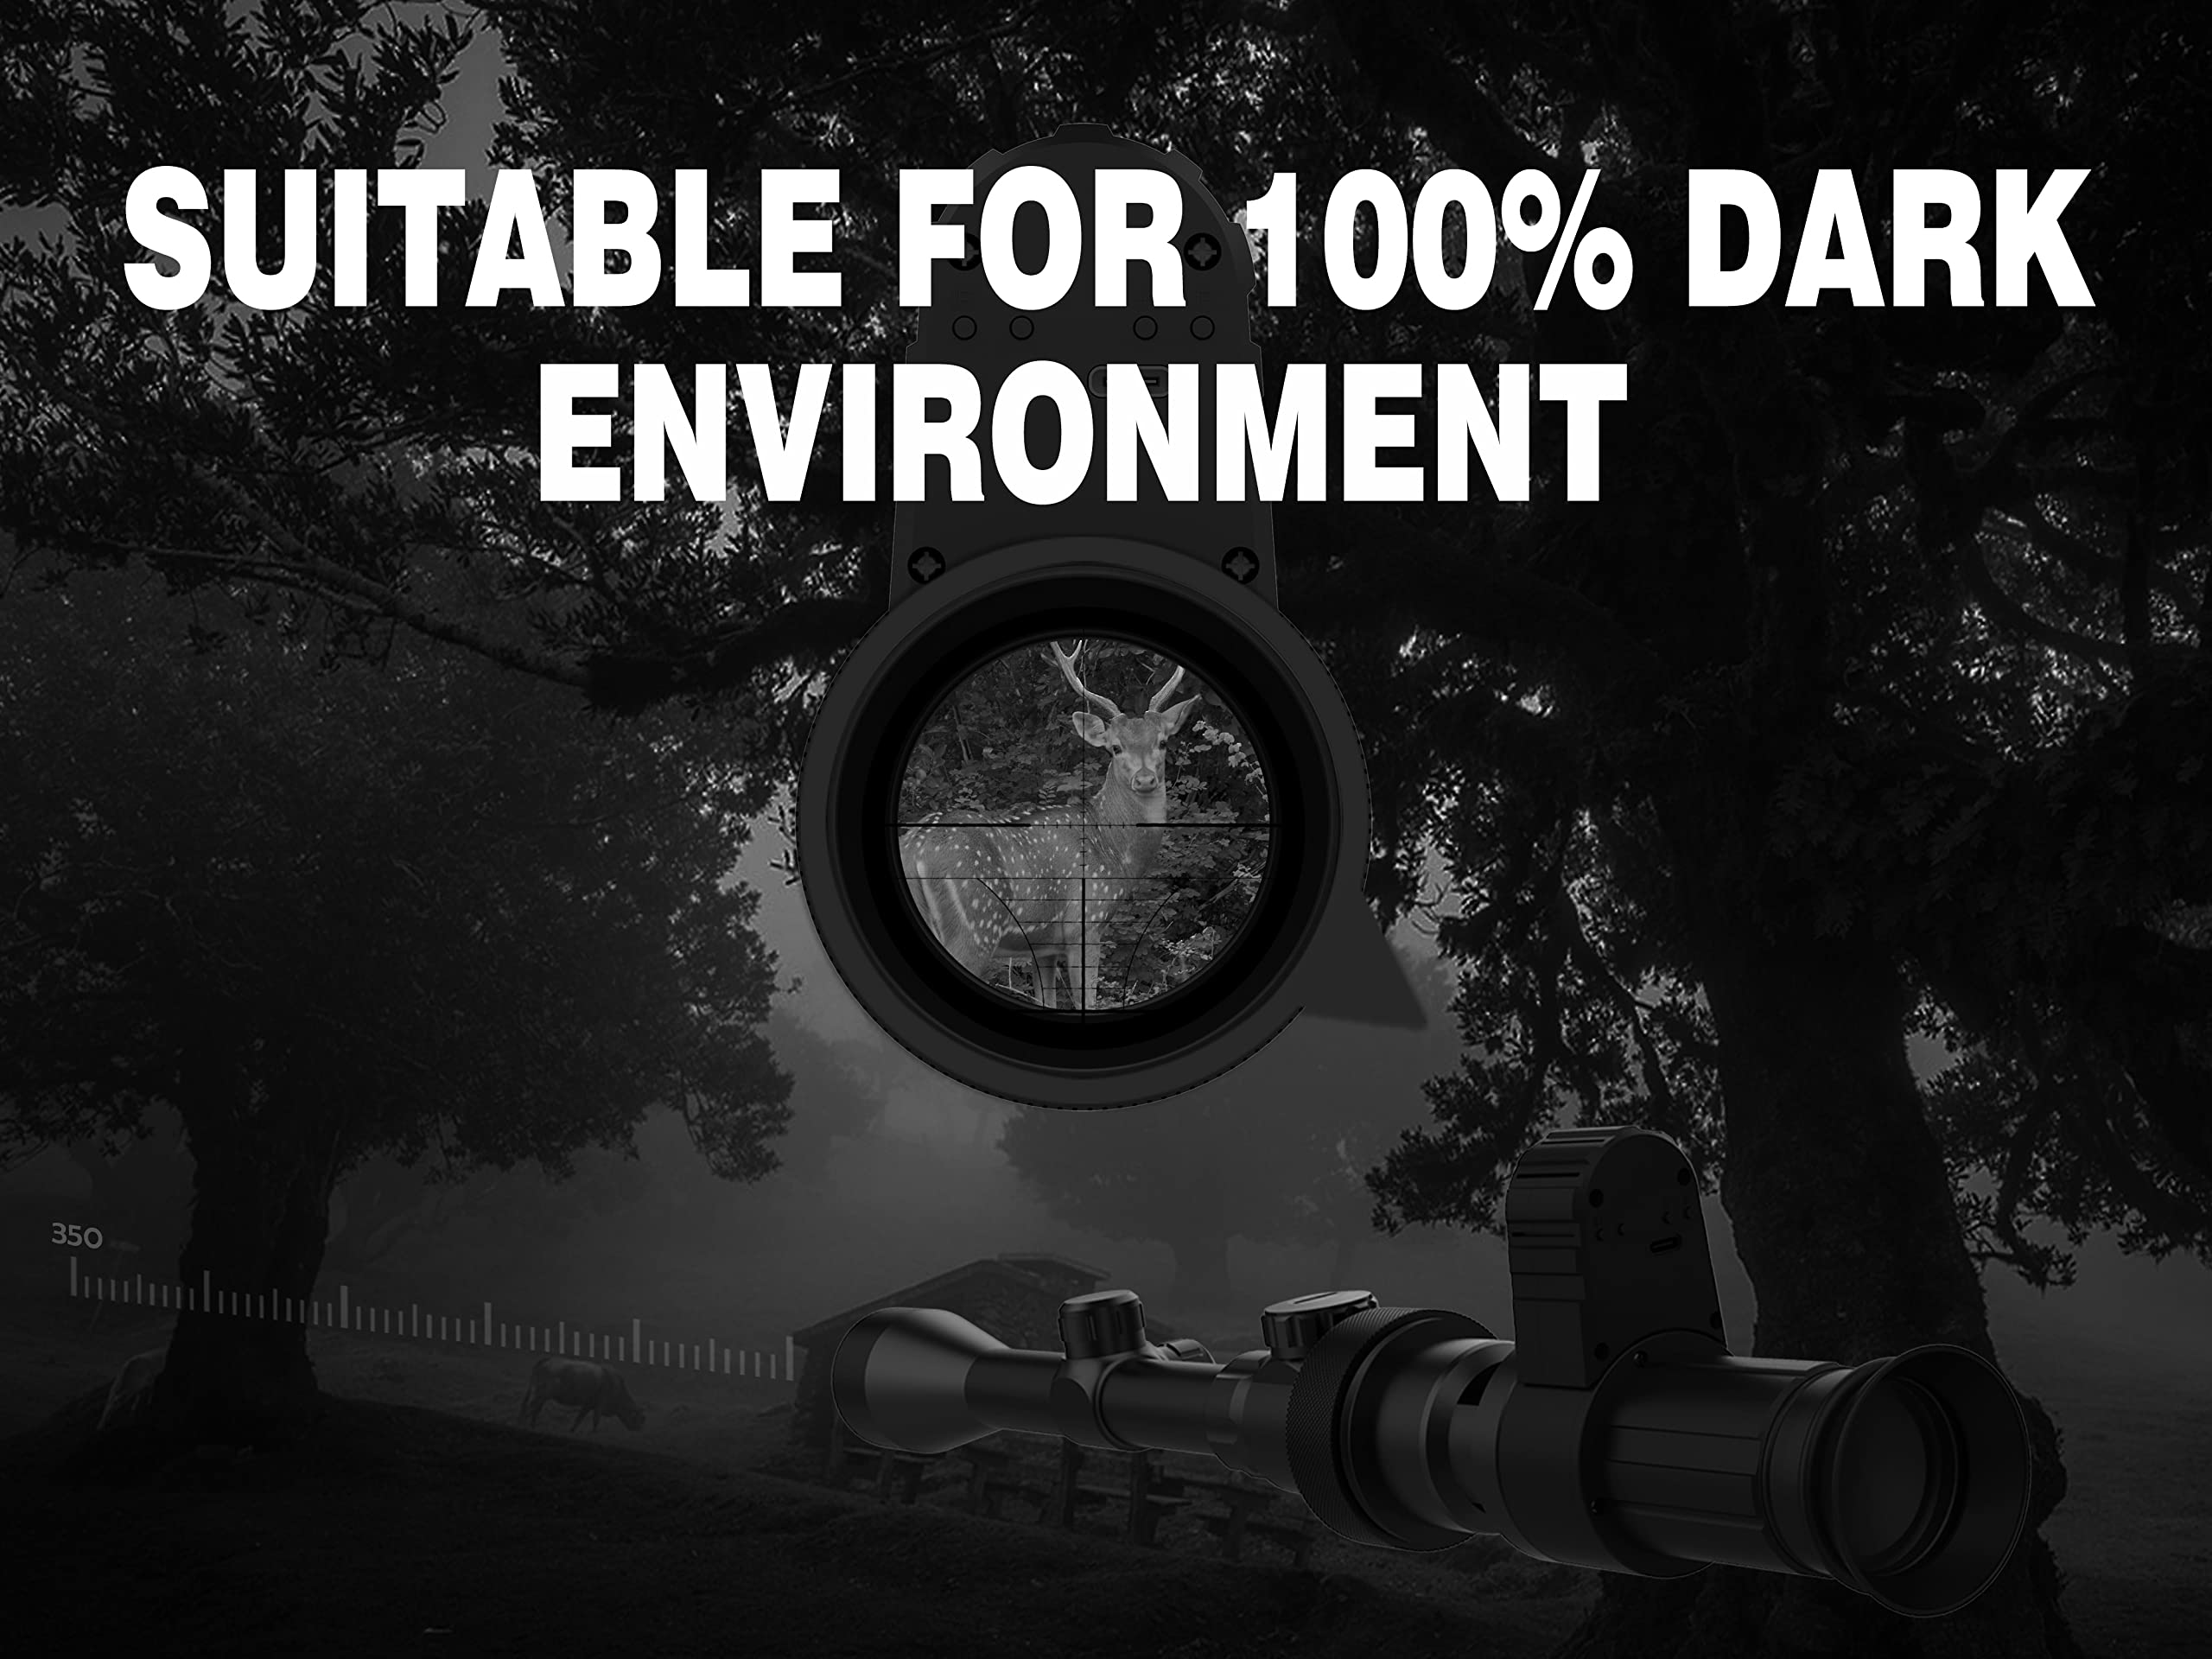 Digital Night Vision Rifle Scope, 1.54 inch Screen, Optical Aiming, monocular sightmark, Suitable for All Black Outdoor Hunting Environment